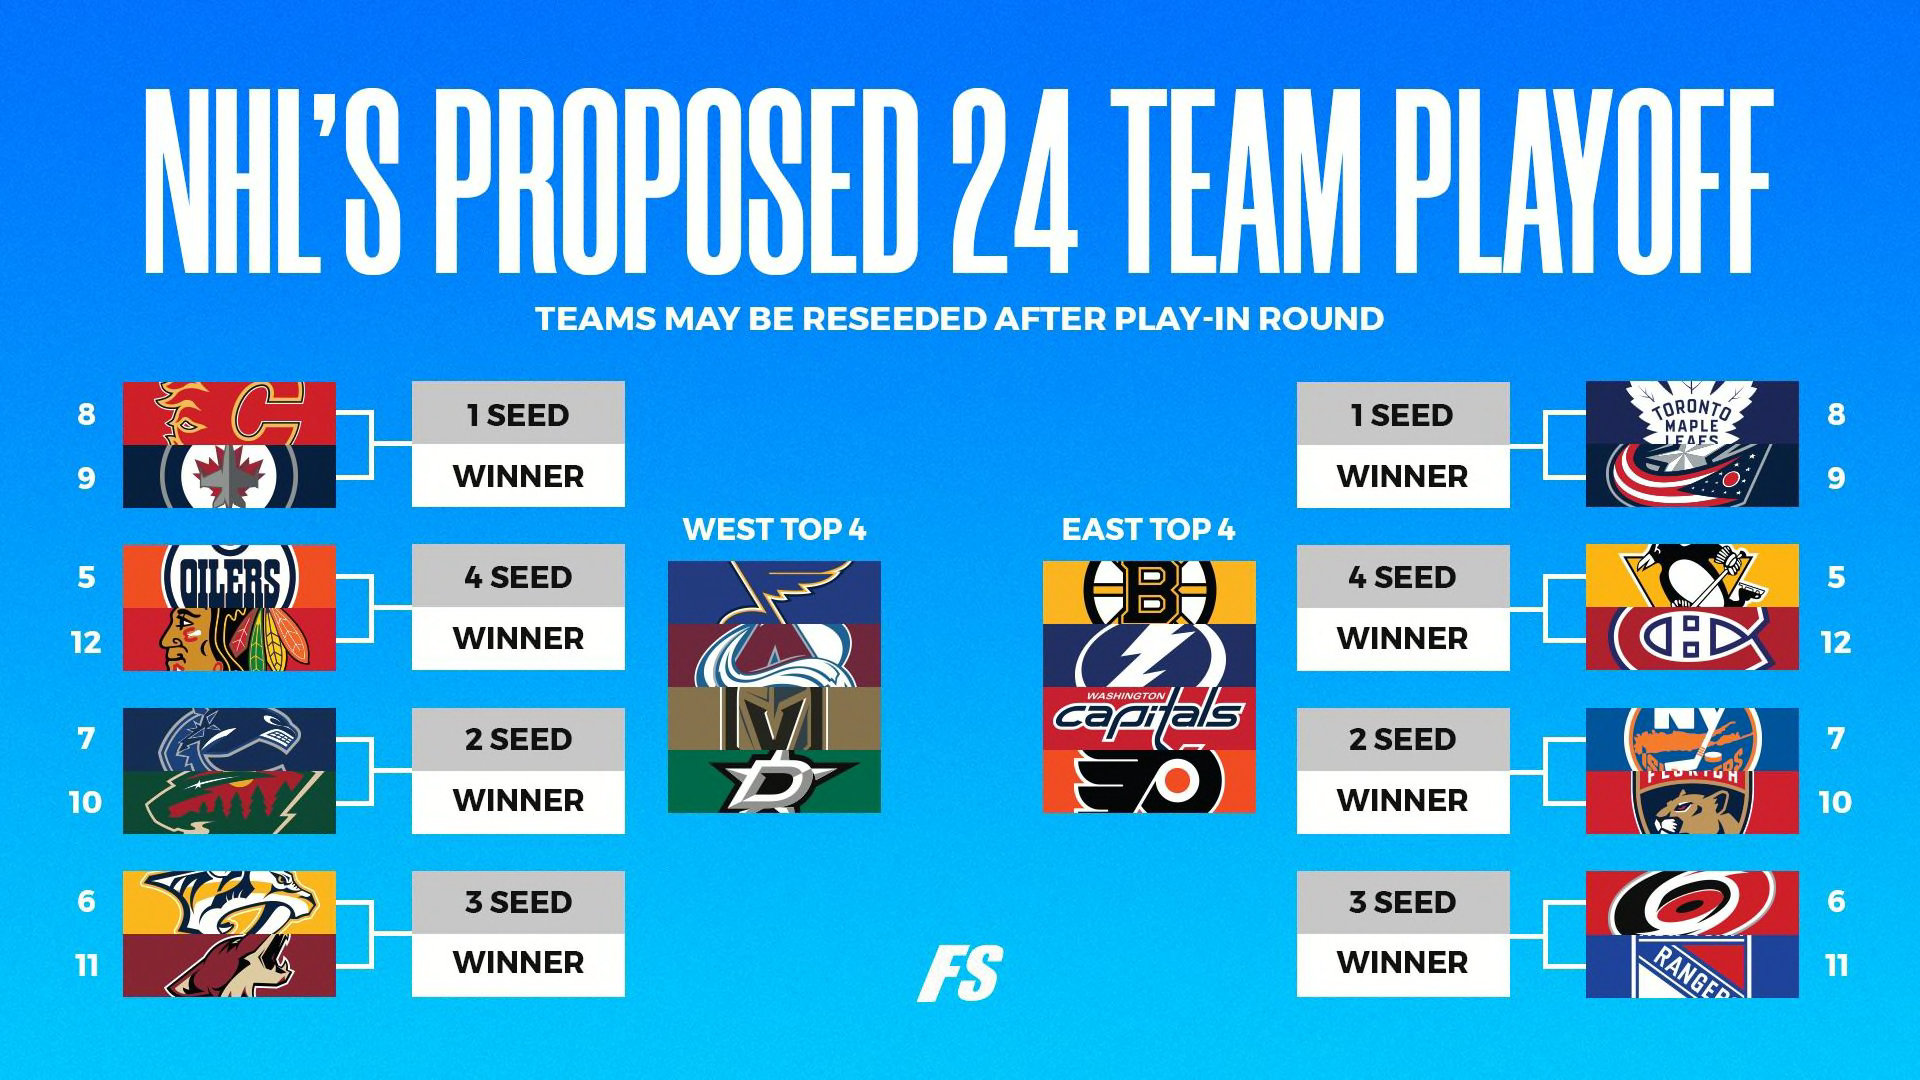 Here is the 2020 NHL 24team playoff bracket for the league's return